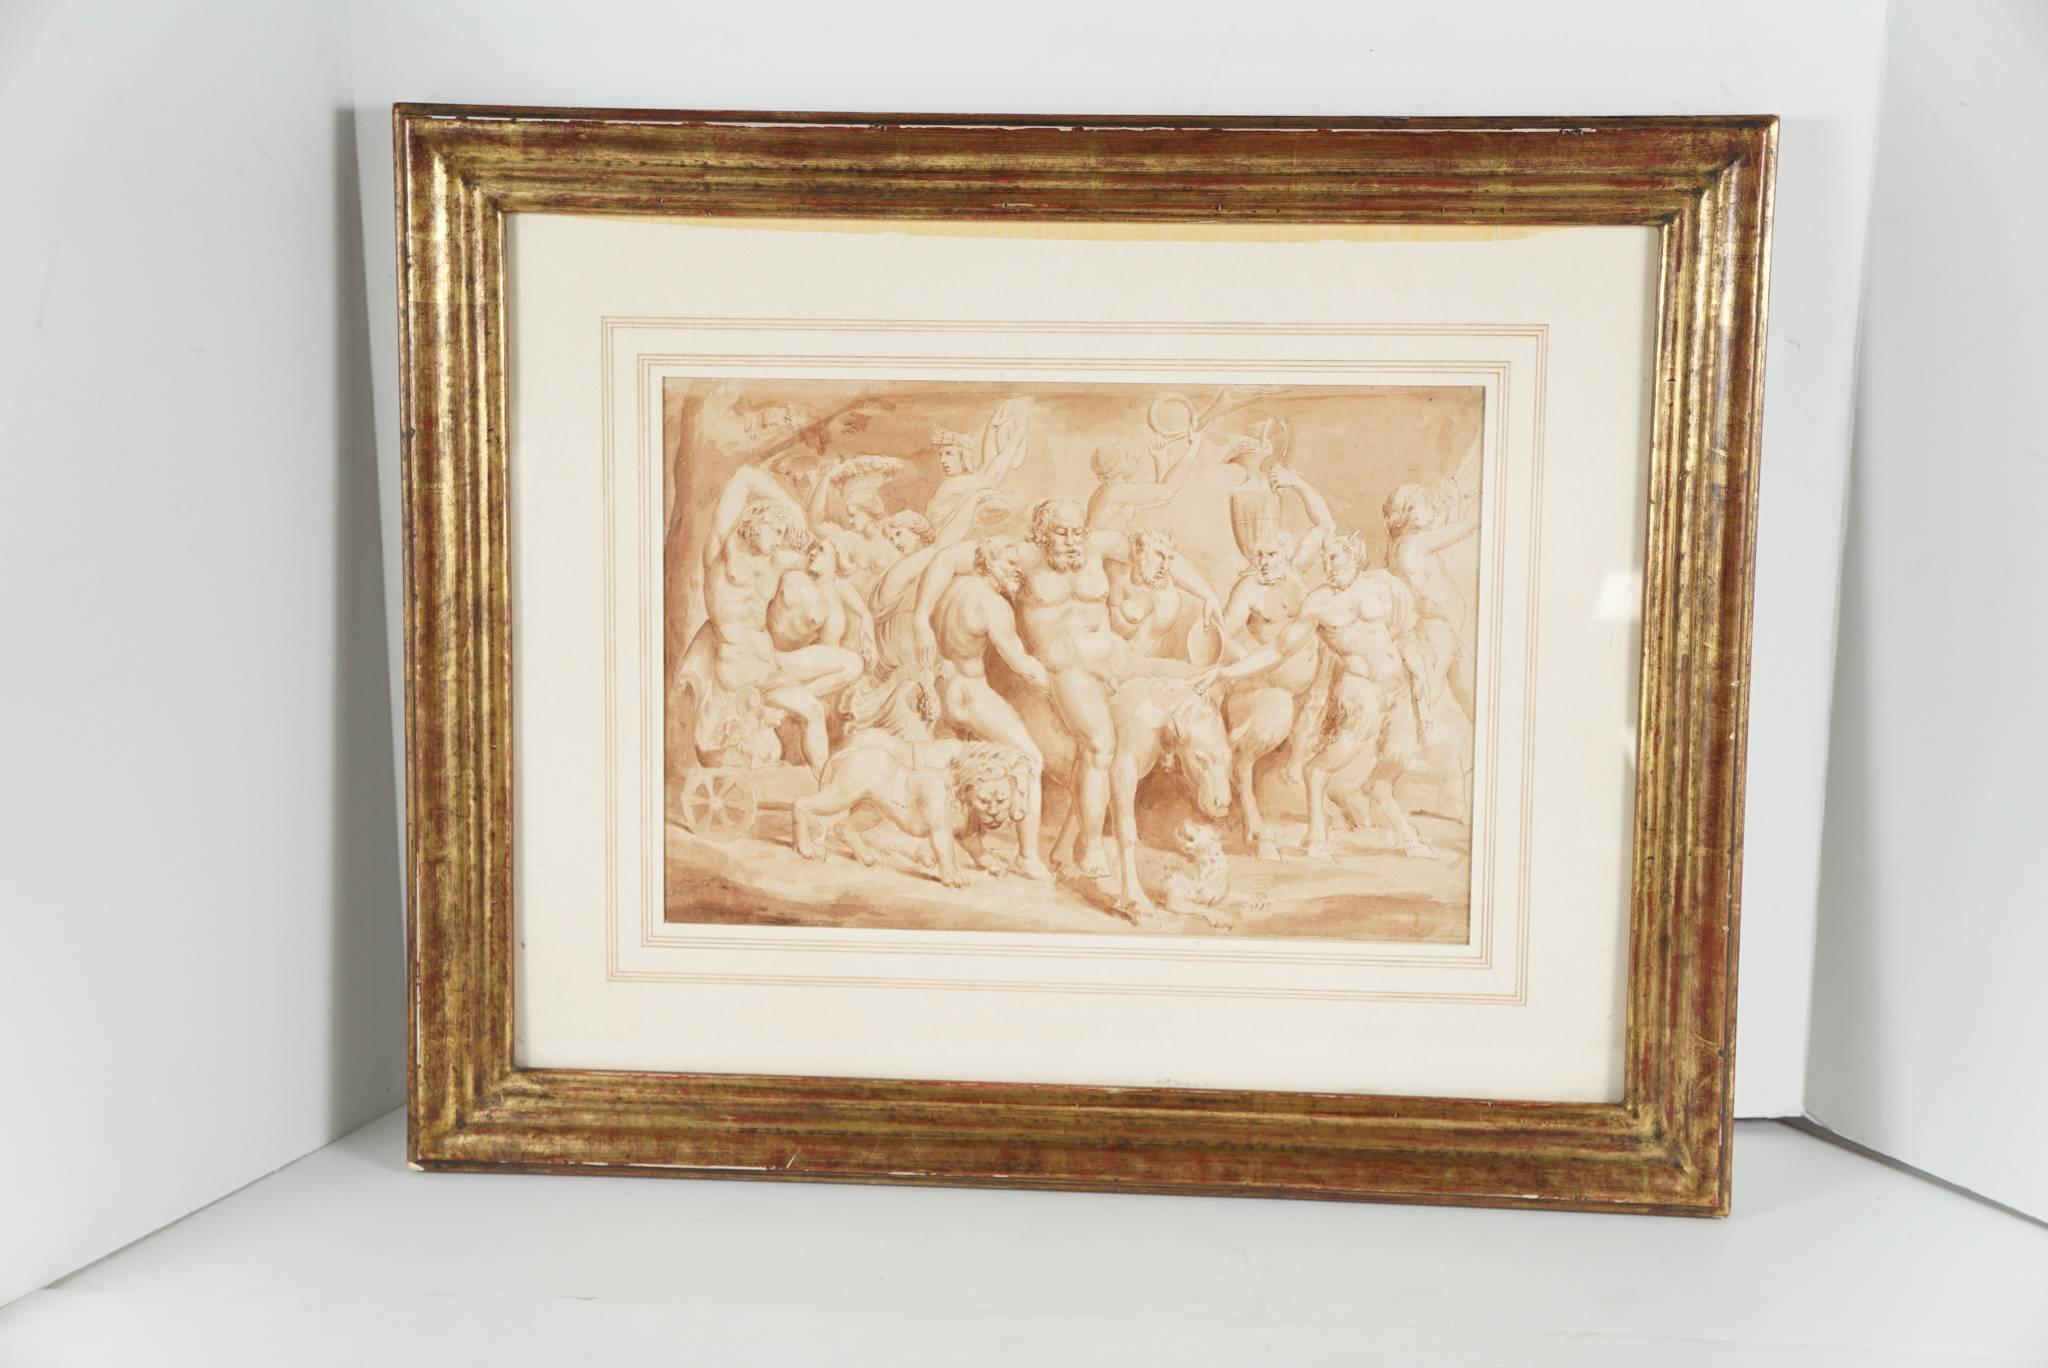 This work likely Italian dates from circa 1680-1700. It relates directly to a 16th century engraving of the same subject after a drawing by Giulio Romano. That composition is inspired by a sarcophagus representing the Triumph of Baccus and Ariadne.